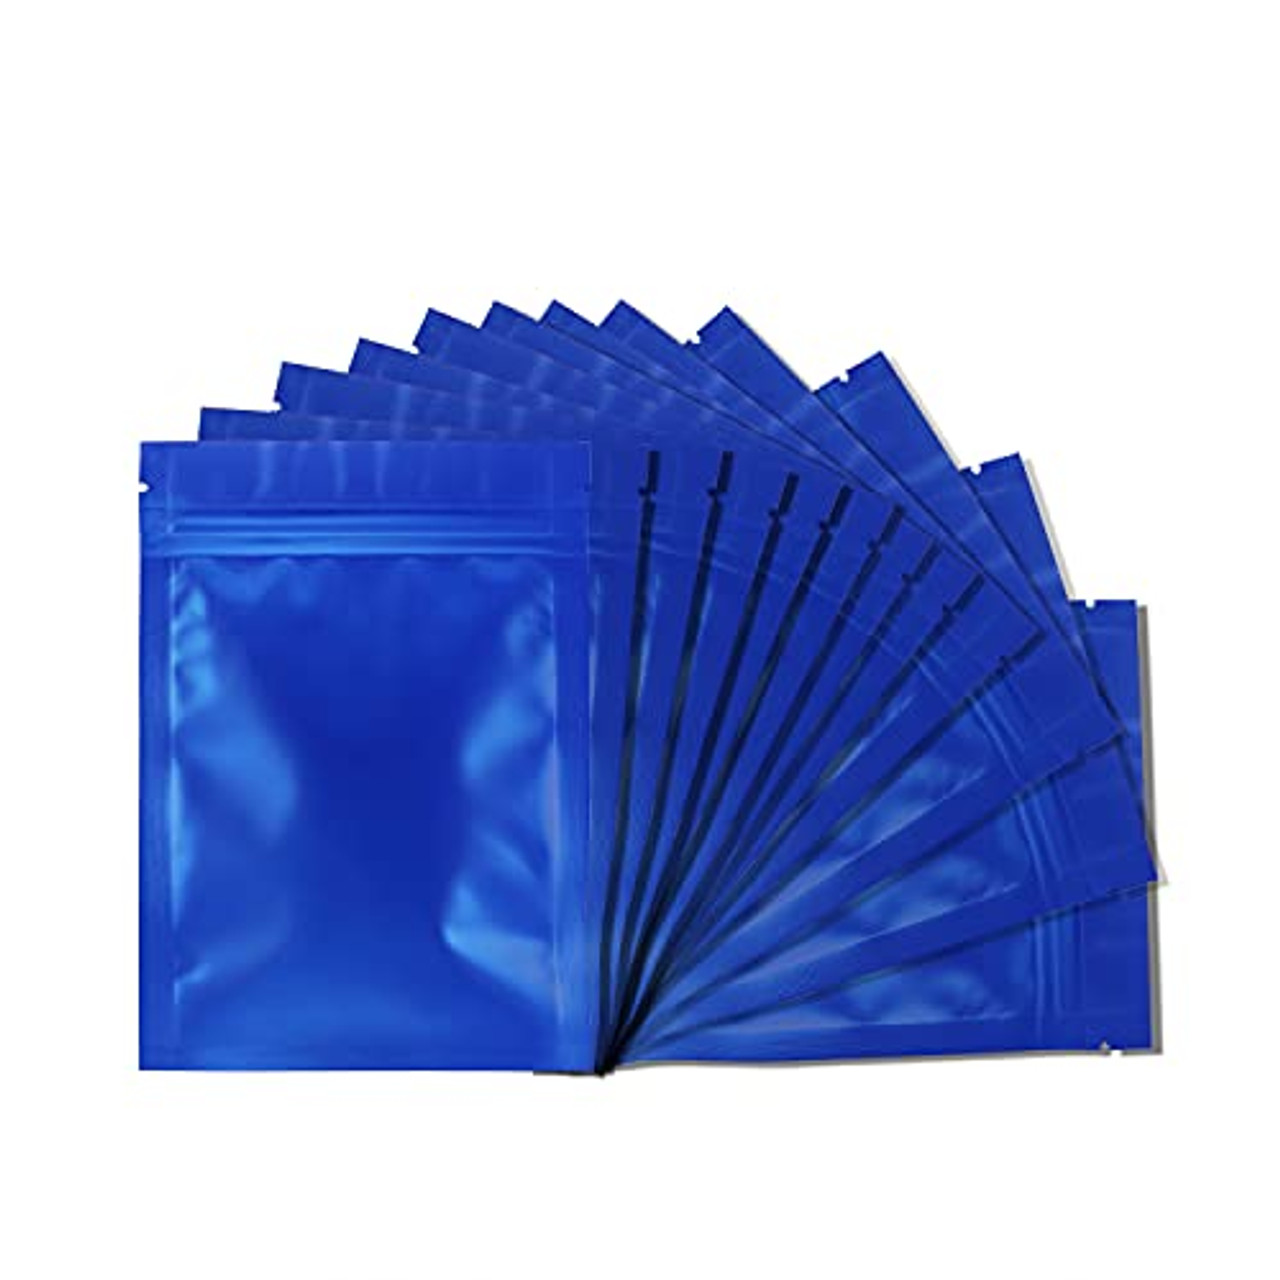 200 Pack Smell Proof Bags - 3 x 4 Inch Resealable Mylar Bags Foil Pouch Bag  Flat Bag Matte Black